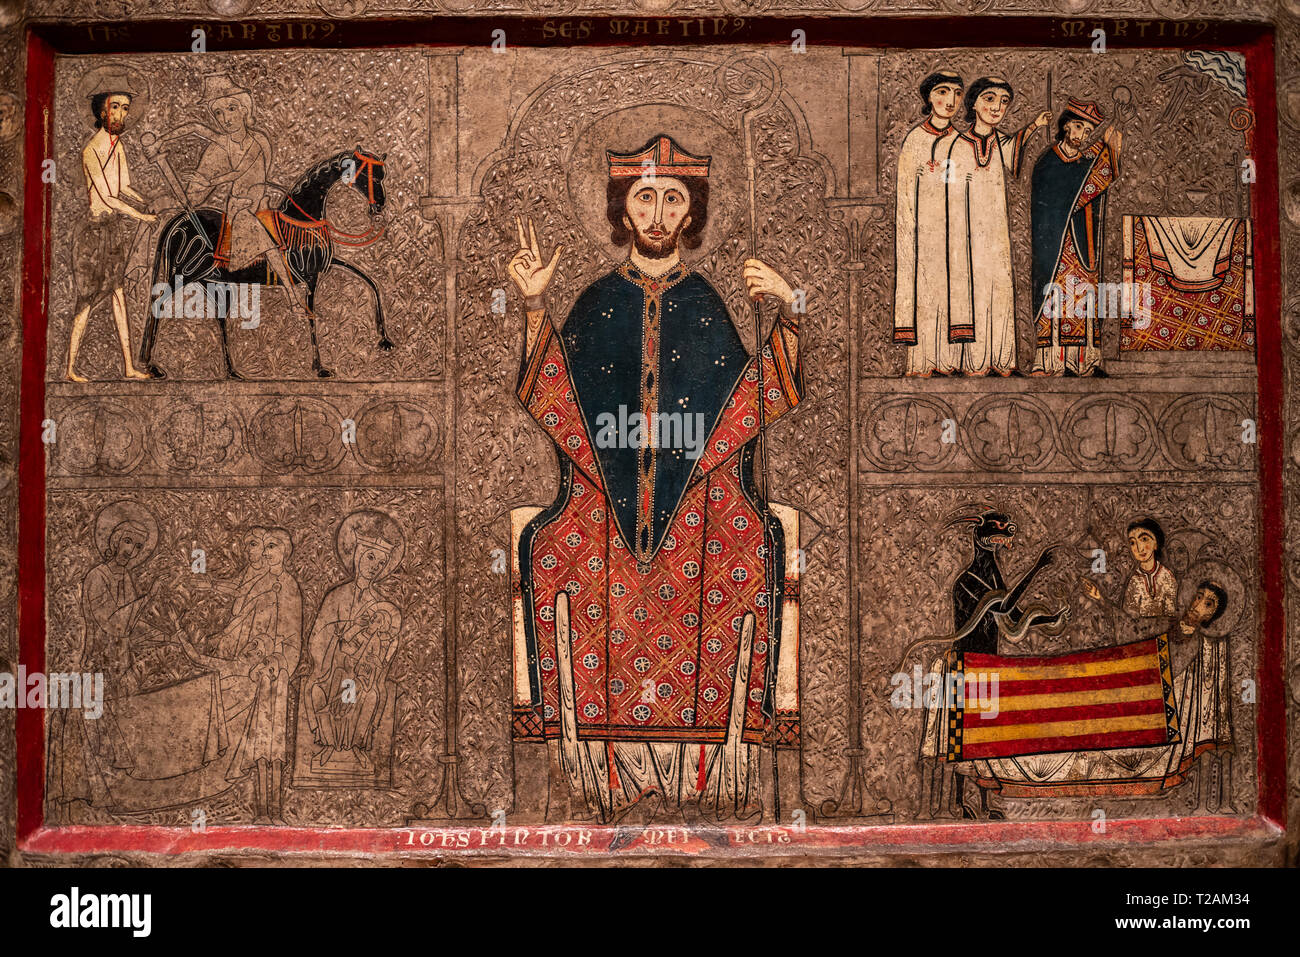 Romanesque art in the National Art Museum of Catalonia,Barcrelona,front of the altar of Gia (second half of the 13th century), Sant Martí de Gia churc. Stock Photo